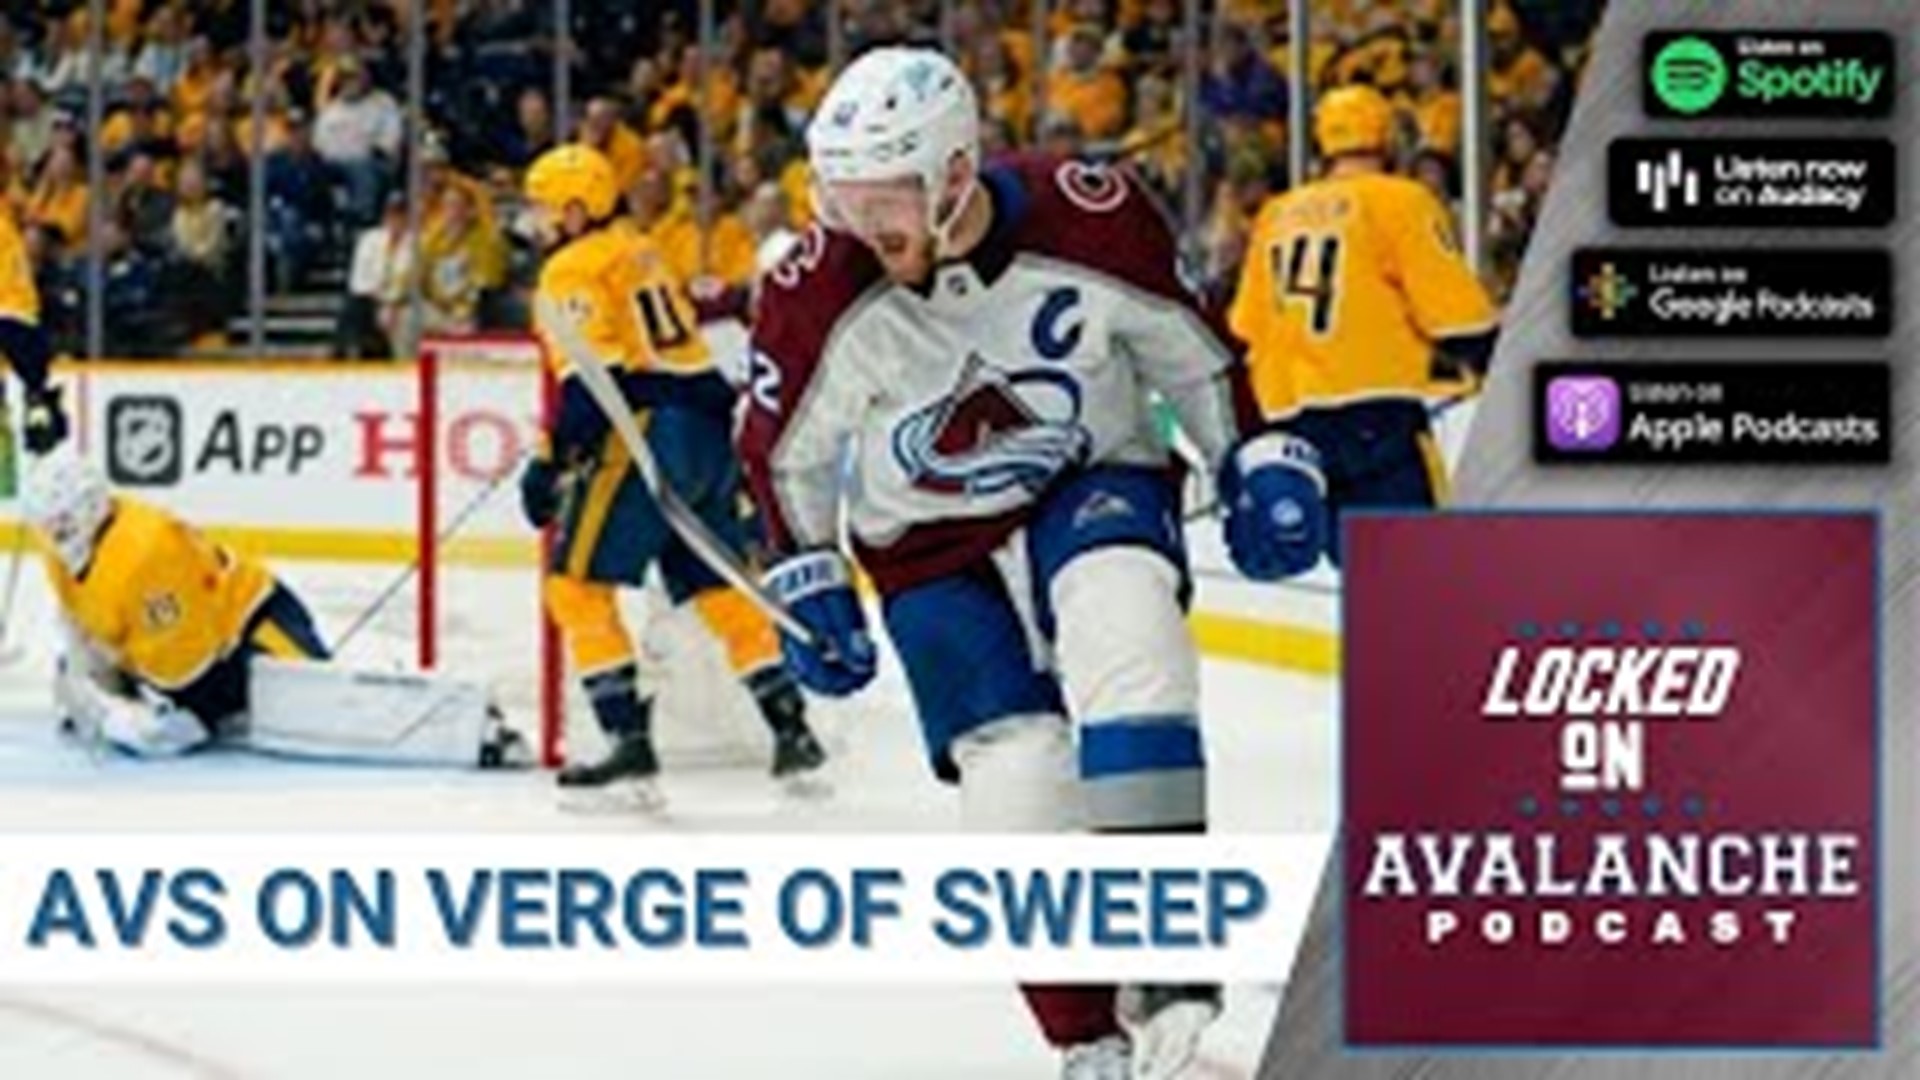 For the second time in as many years the Colorado Avalanche are on the verge of sweeping their first round opponent.